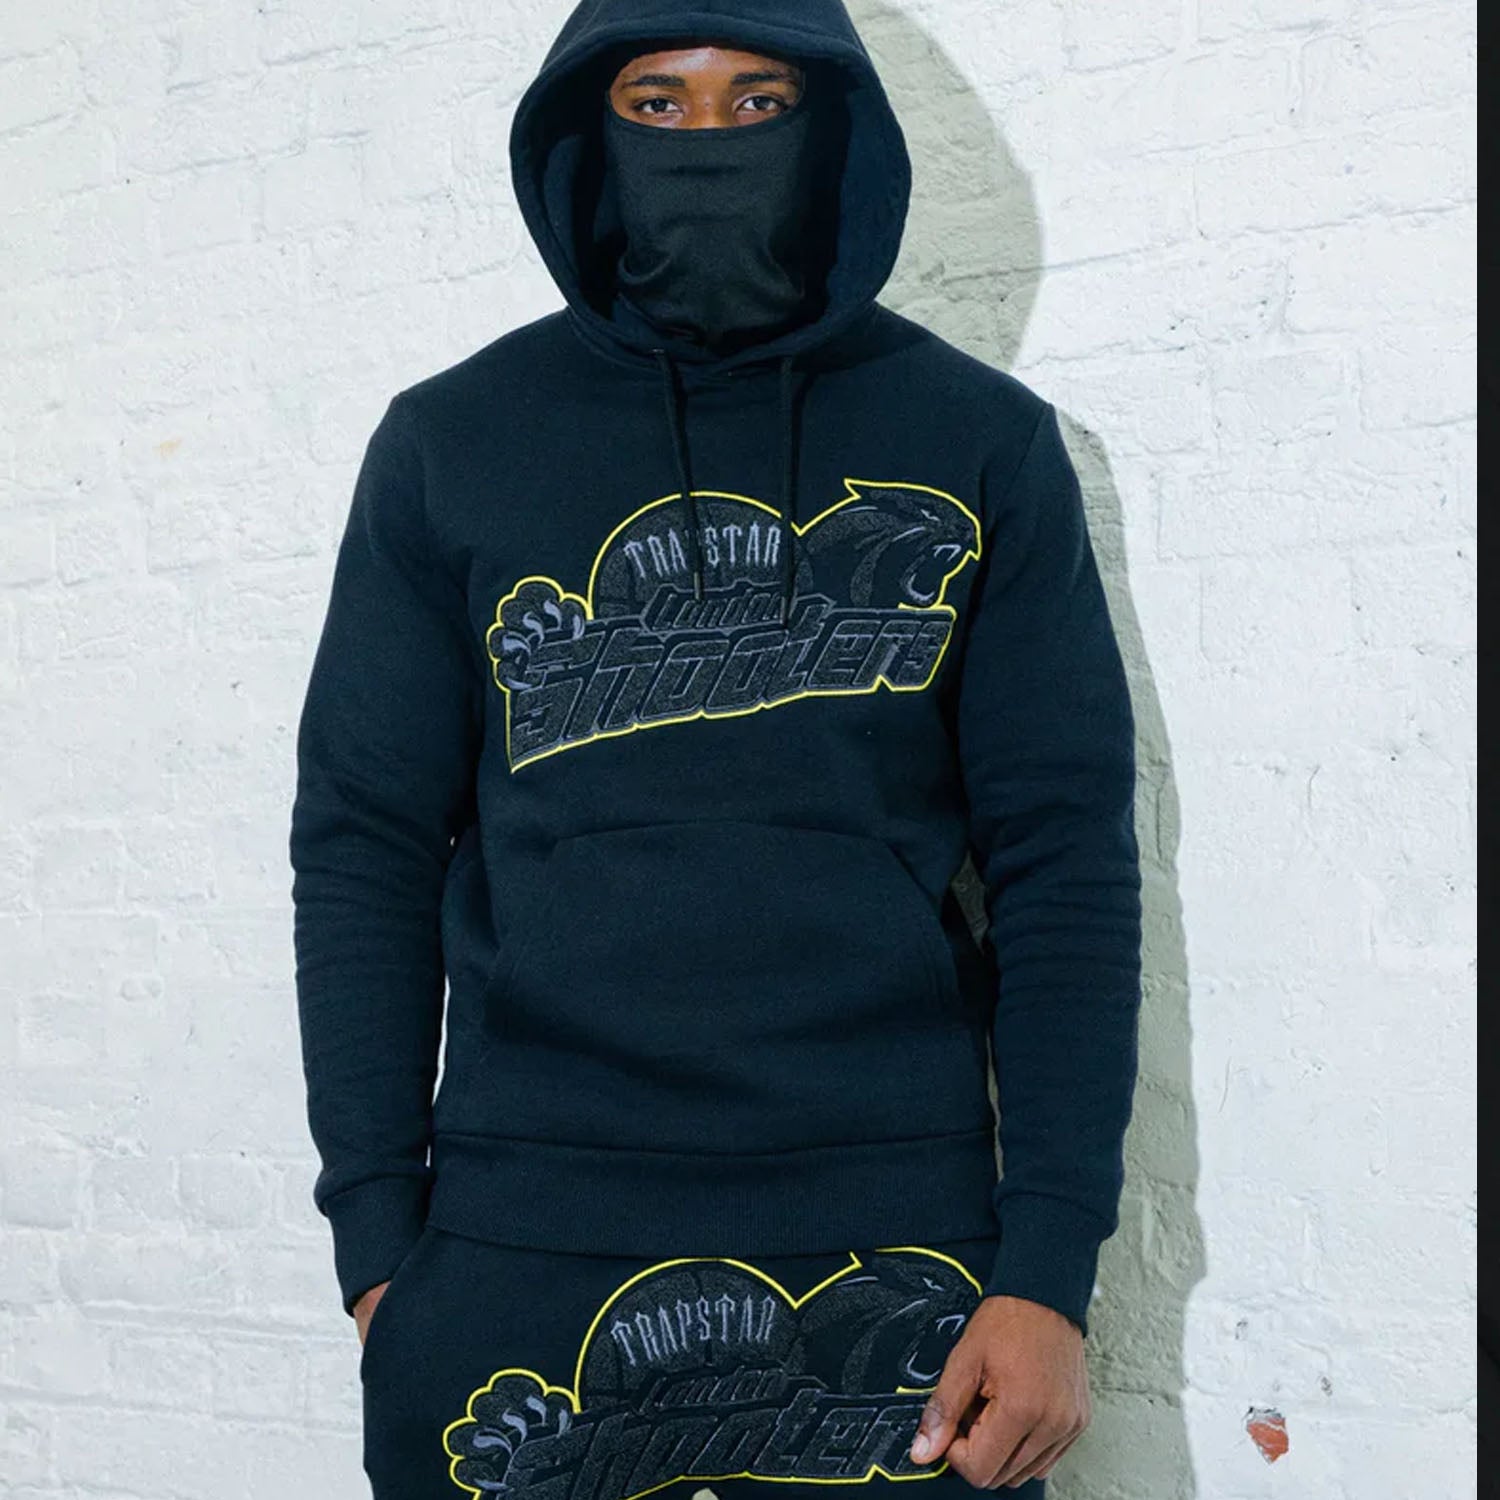 Trapstar Shooters Hooded Tracksuit - Black / Lime Green